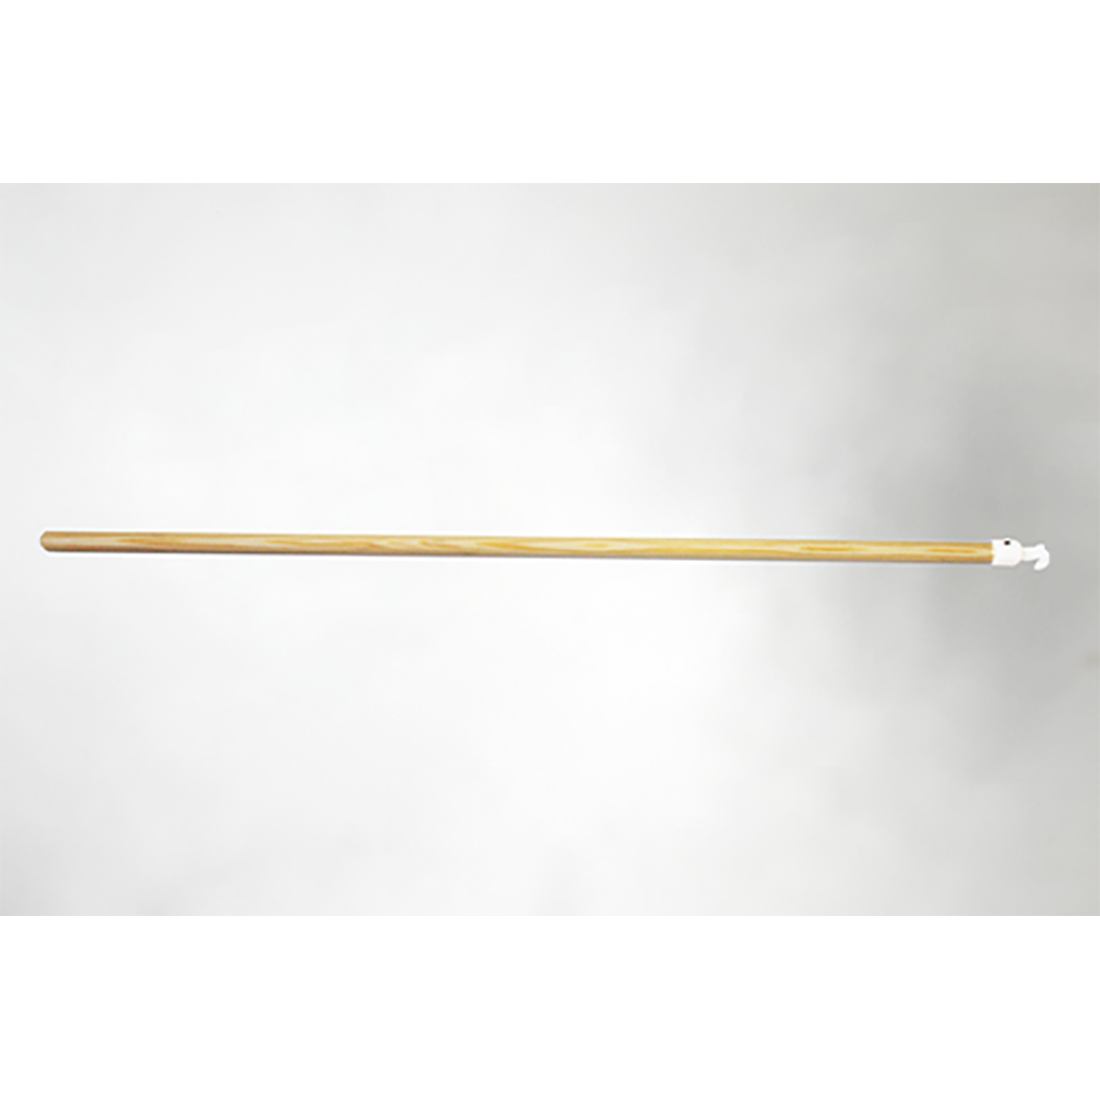 Wooden Rod With Plastic Clip - 39 in.